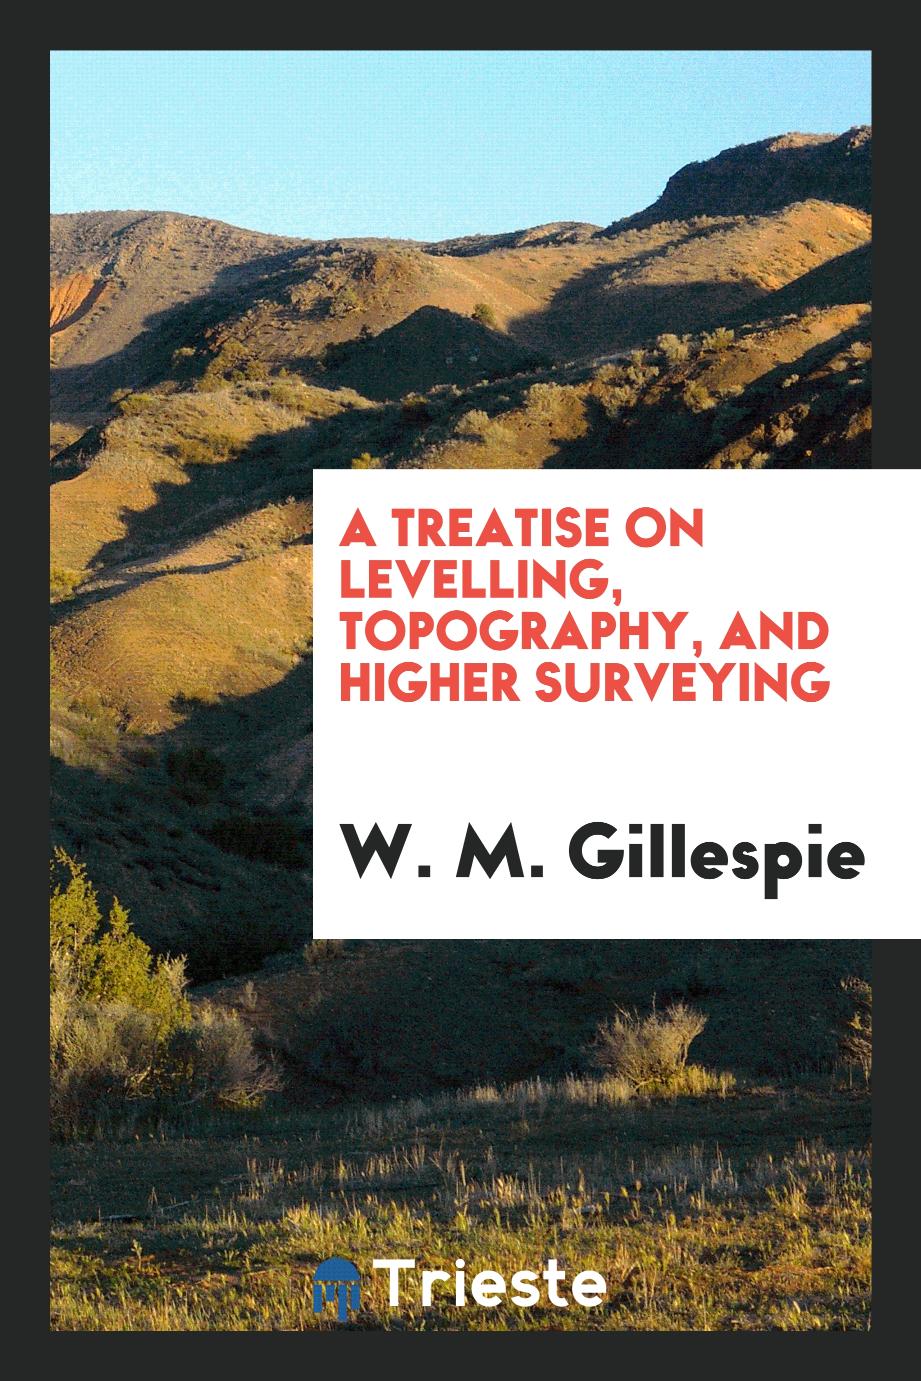 A treatise on levelling, topography, and higher surveying